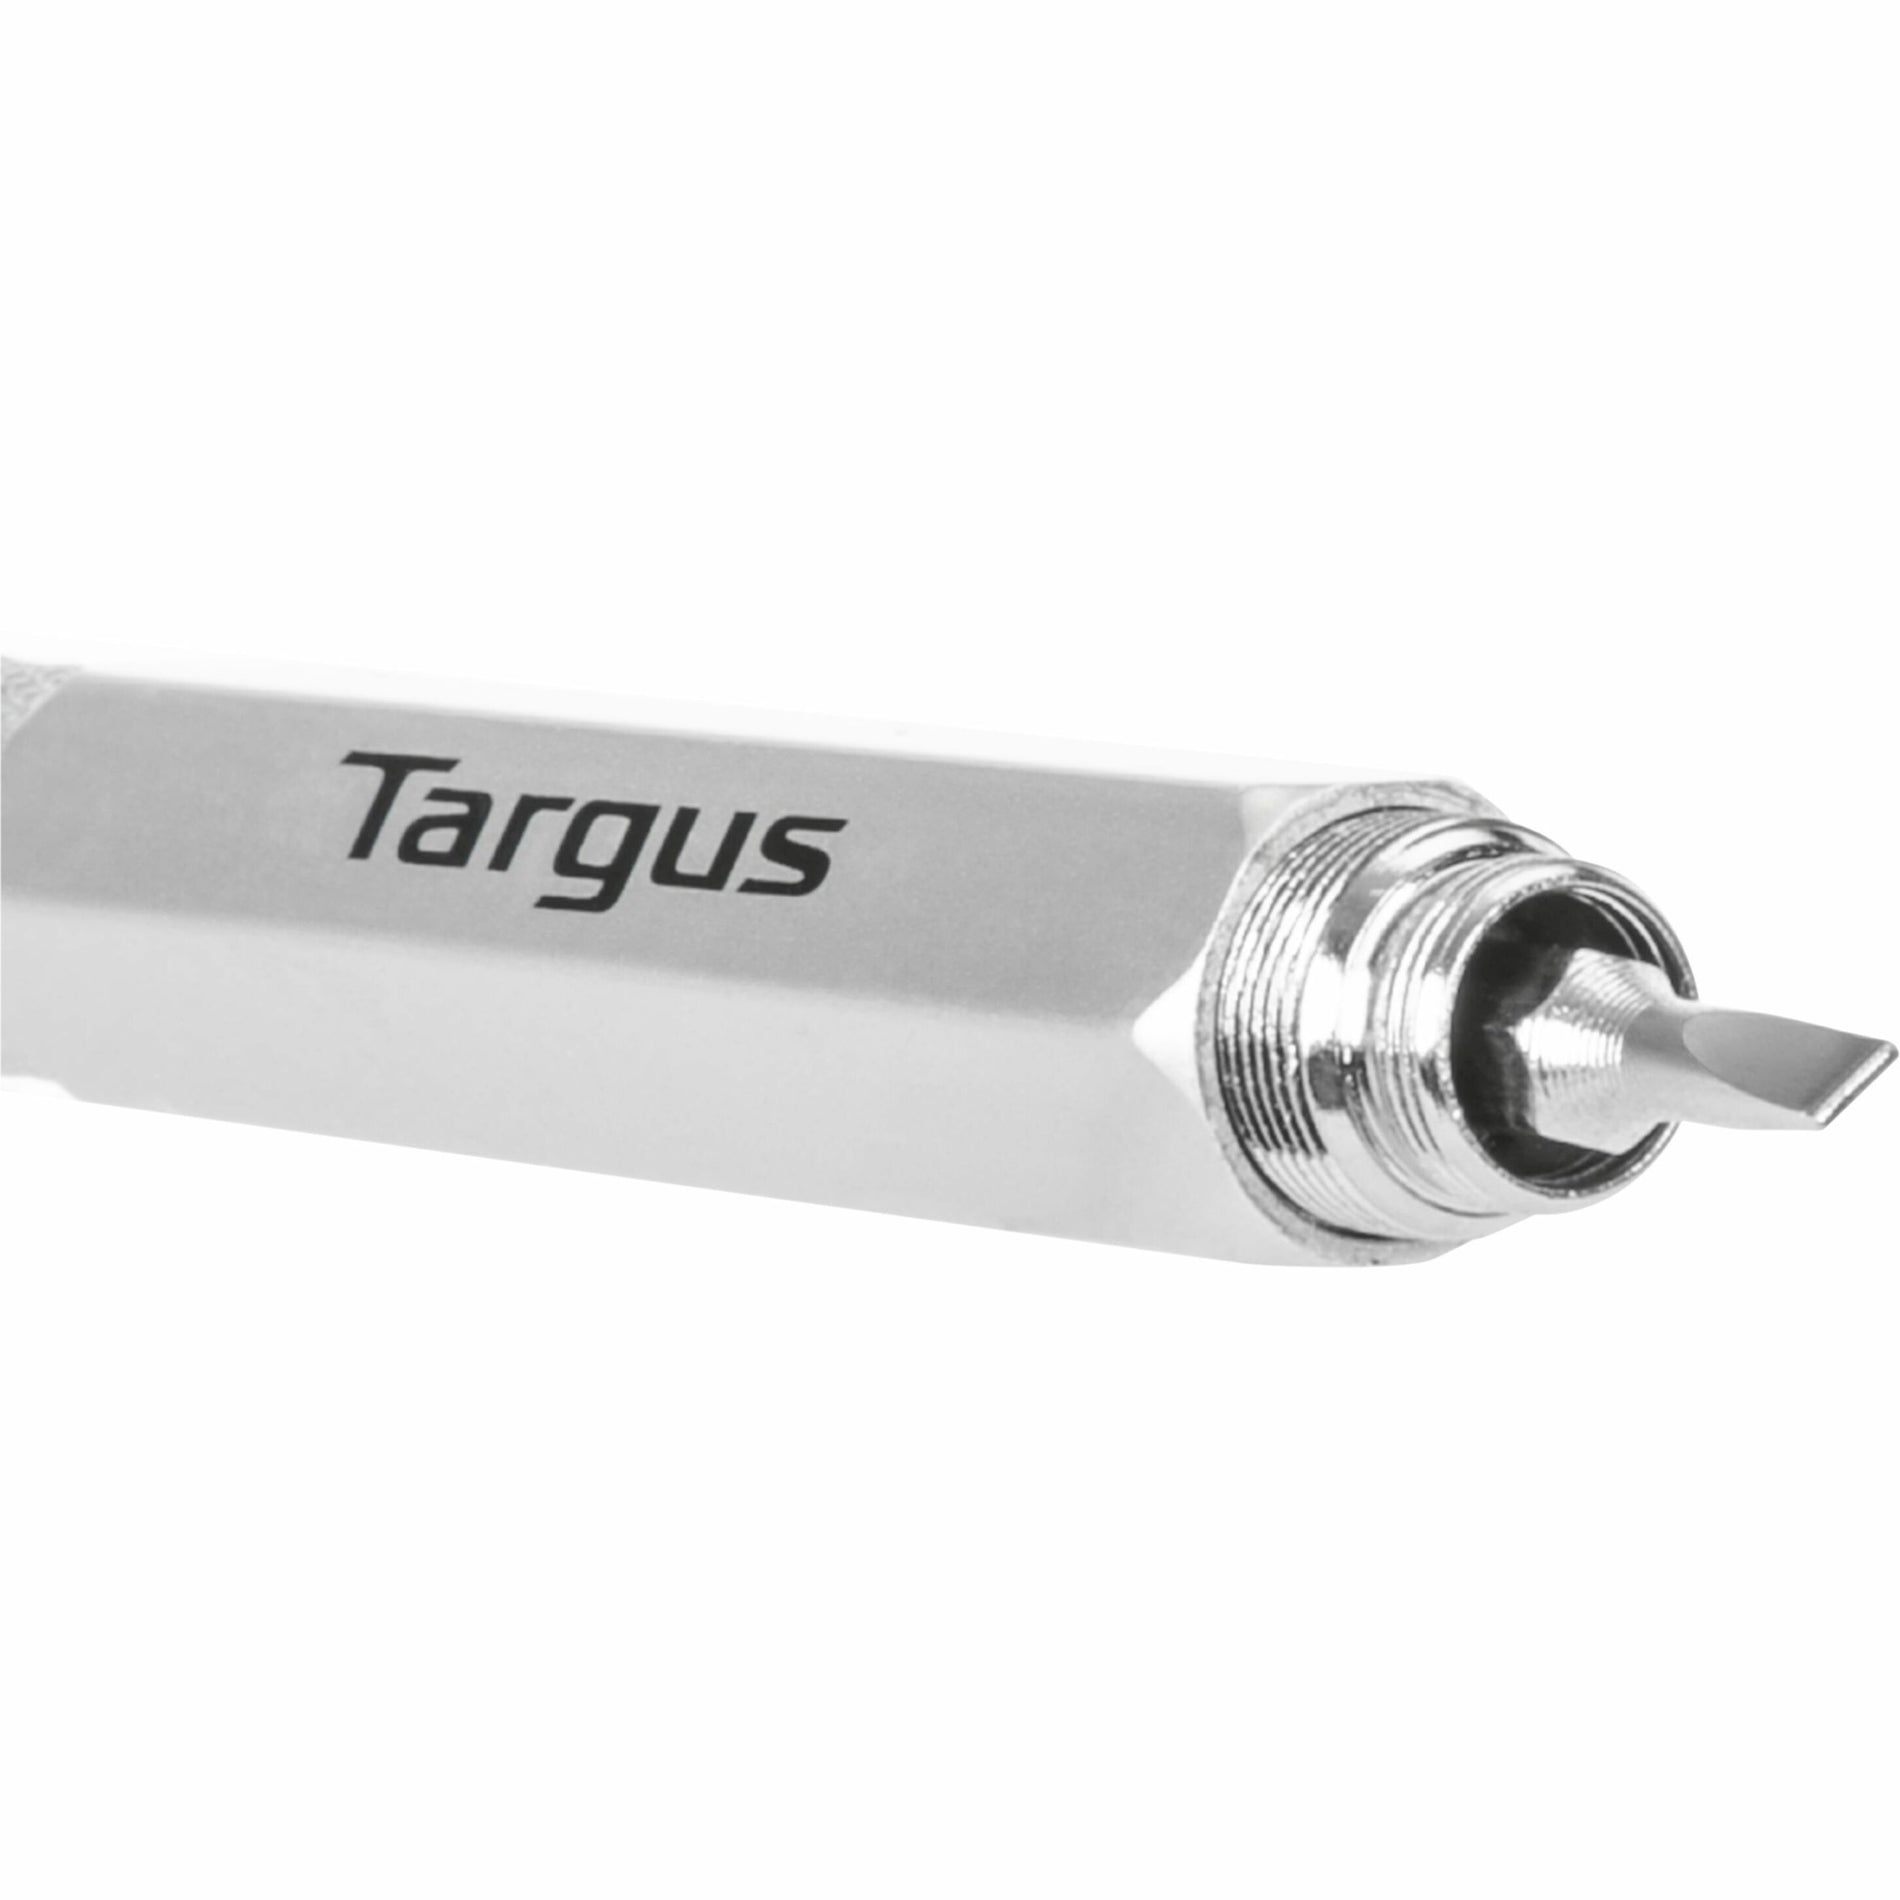 Targus AMM172GL Multi-Tool Keychain Stylus, 1 Year Warranty, Capacitive Touchscreen Supported